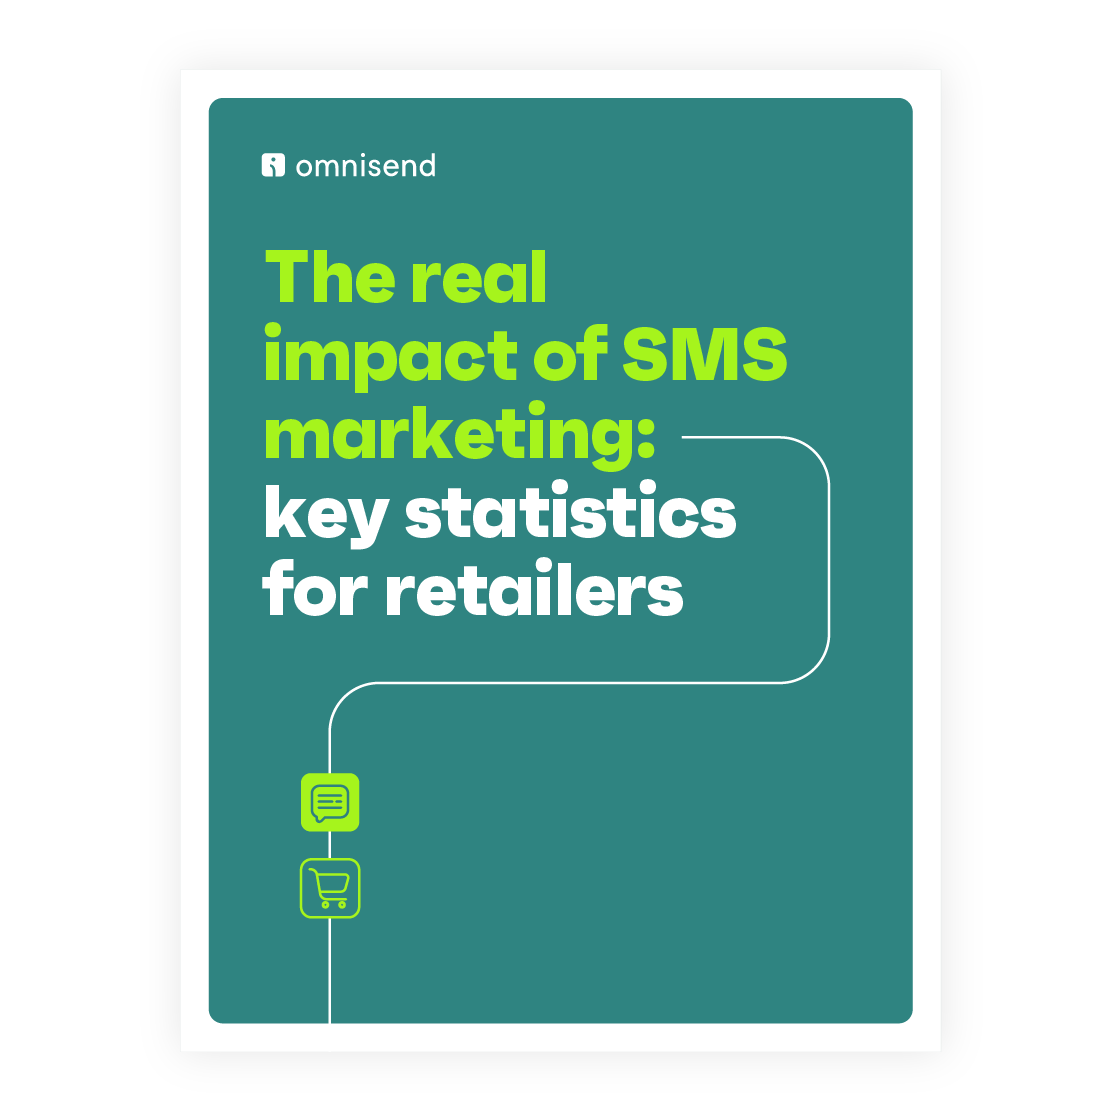 What is the real impact of SMS marketing?